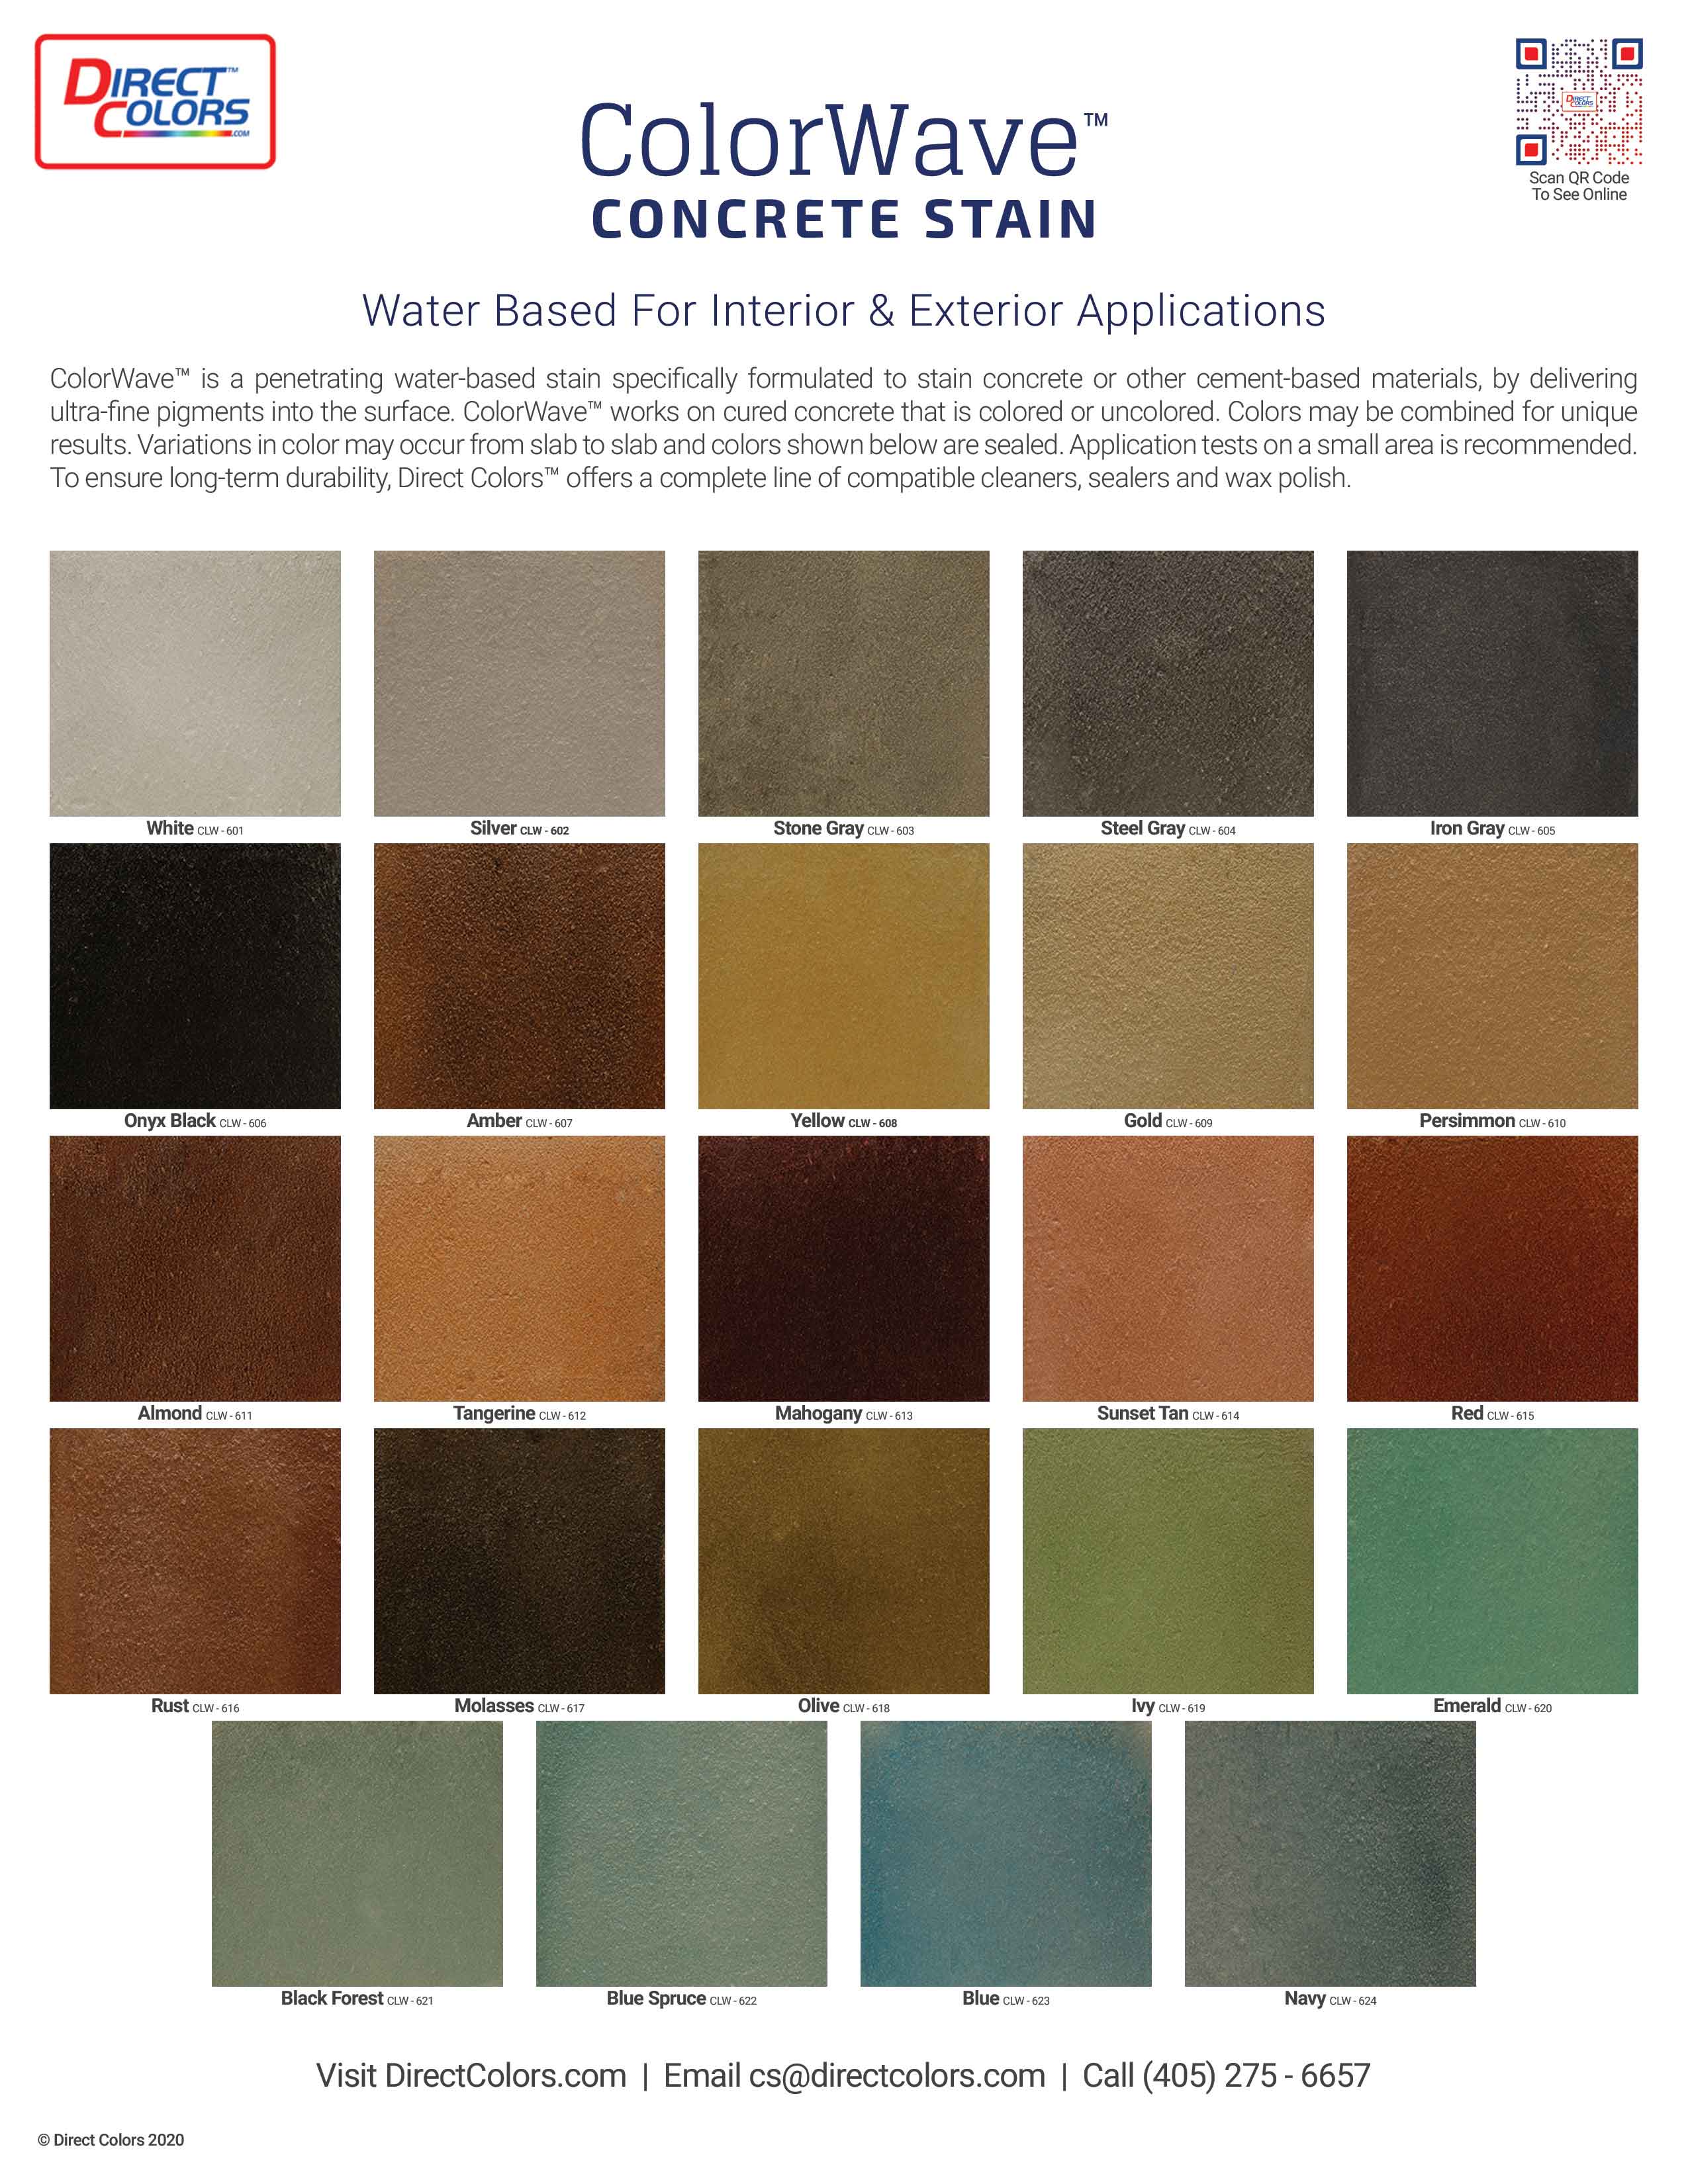 Water Based Concrete Stain Colorwave™ By Direct Colors